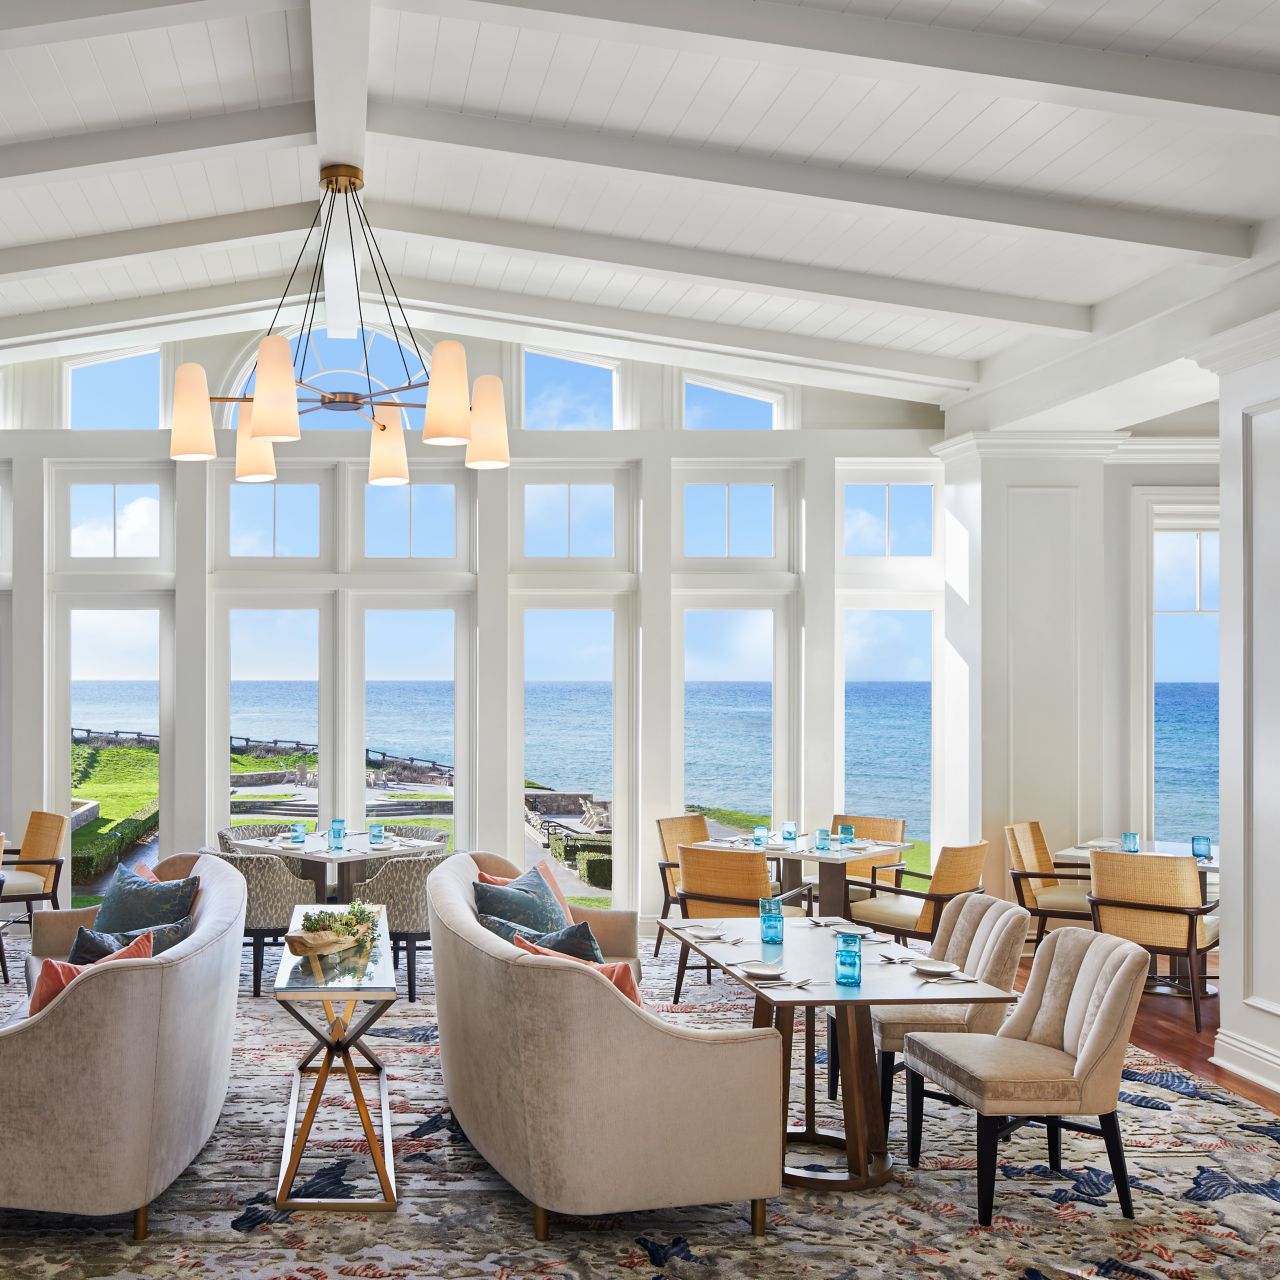 Airy space with dining tables and an entire wall of windows overlooking the ocean